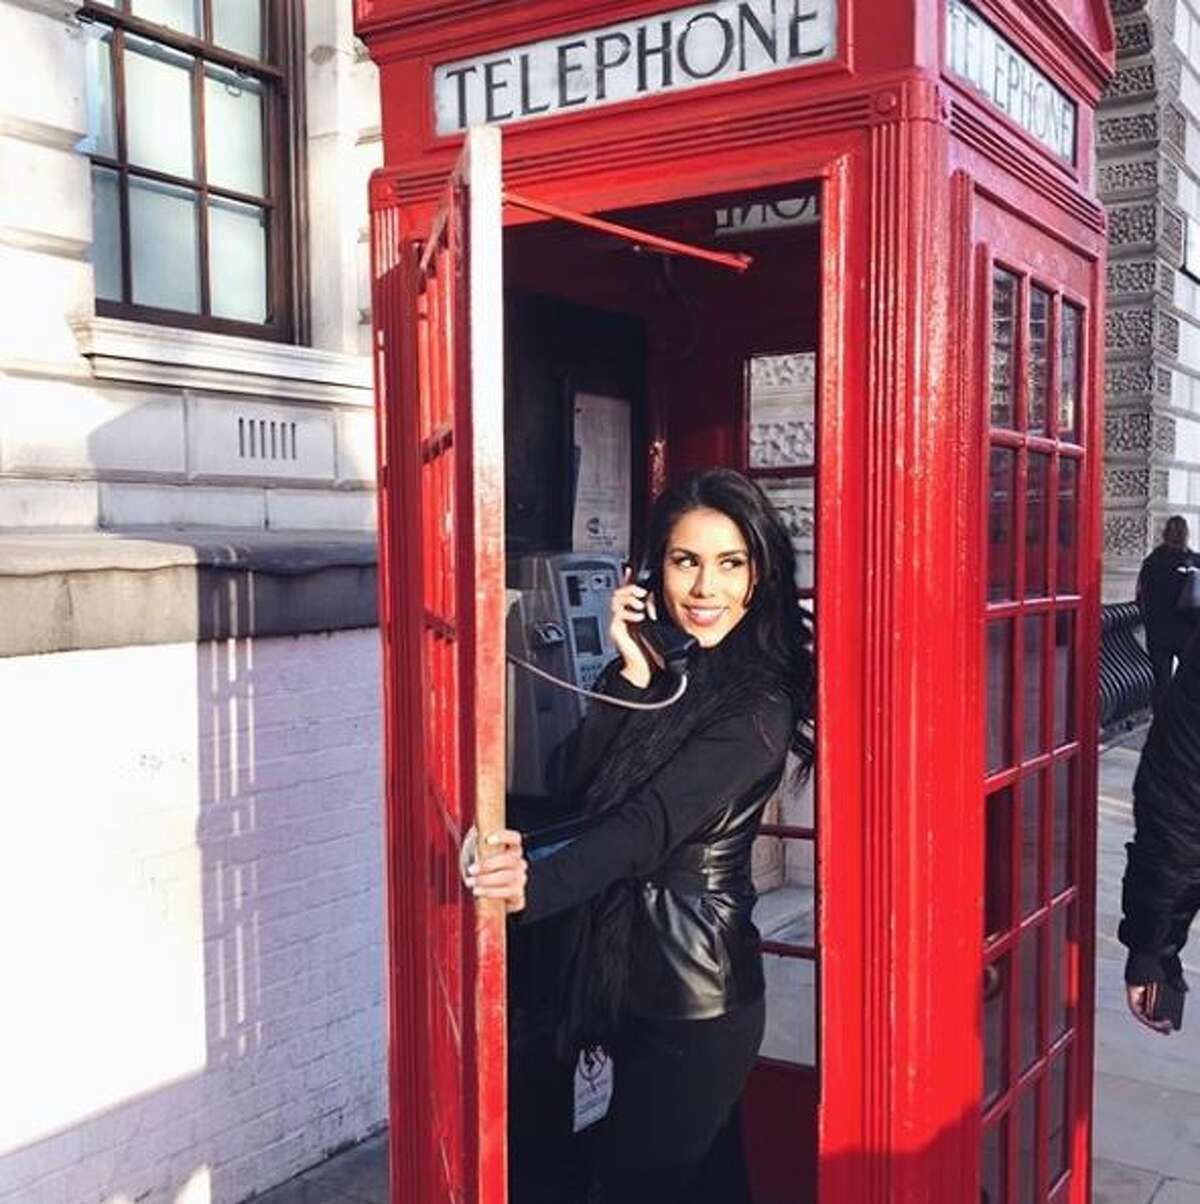 The idea of living in the bustling, vibrant city of London, England has always been a dream for FOX 26's morning traffic anchor, Chrisdyann Uribe. Now she's ready to realize that dream. Uribe will say goodbye to FOX 26 in July and head 'across the pond' to start a new life in London.